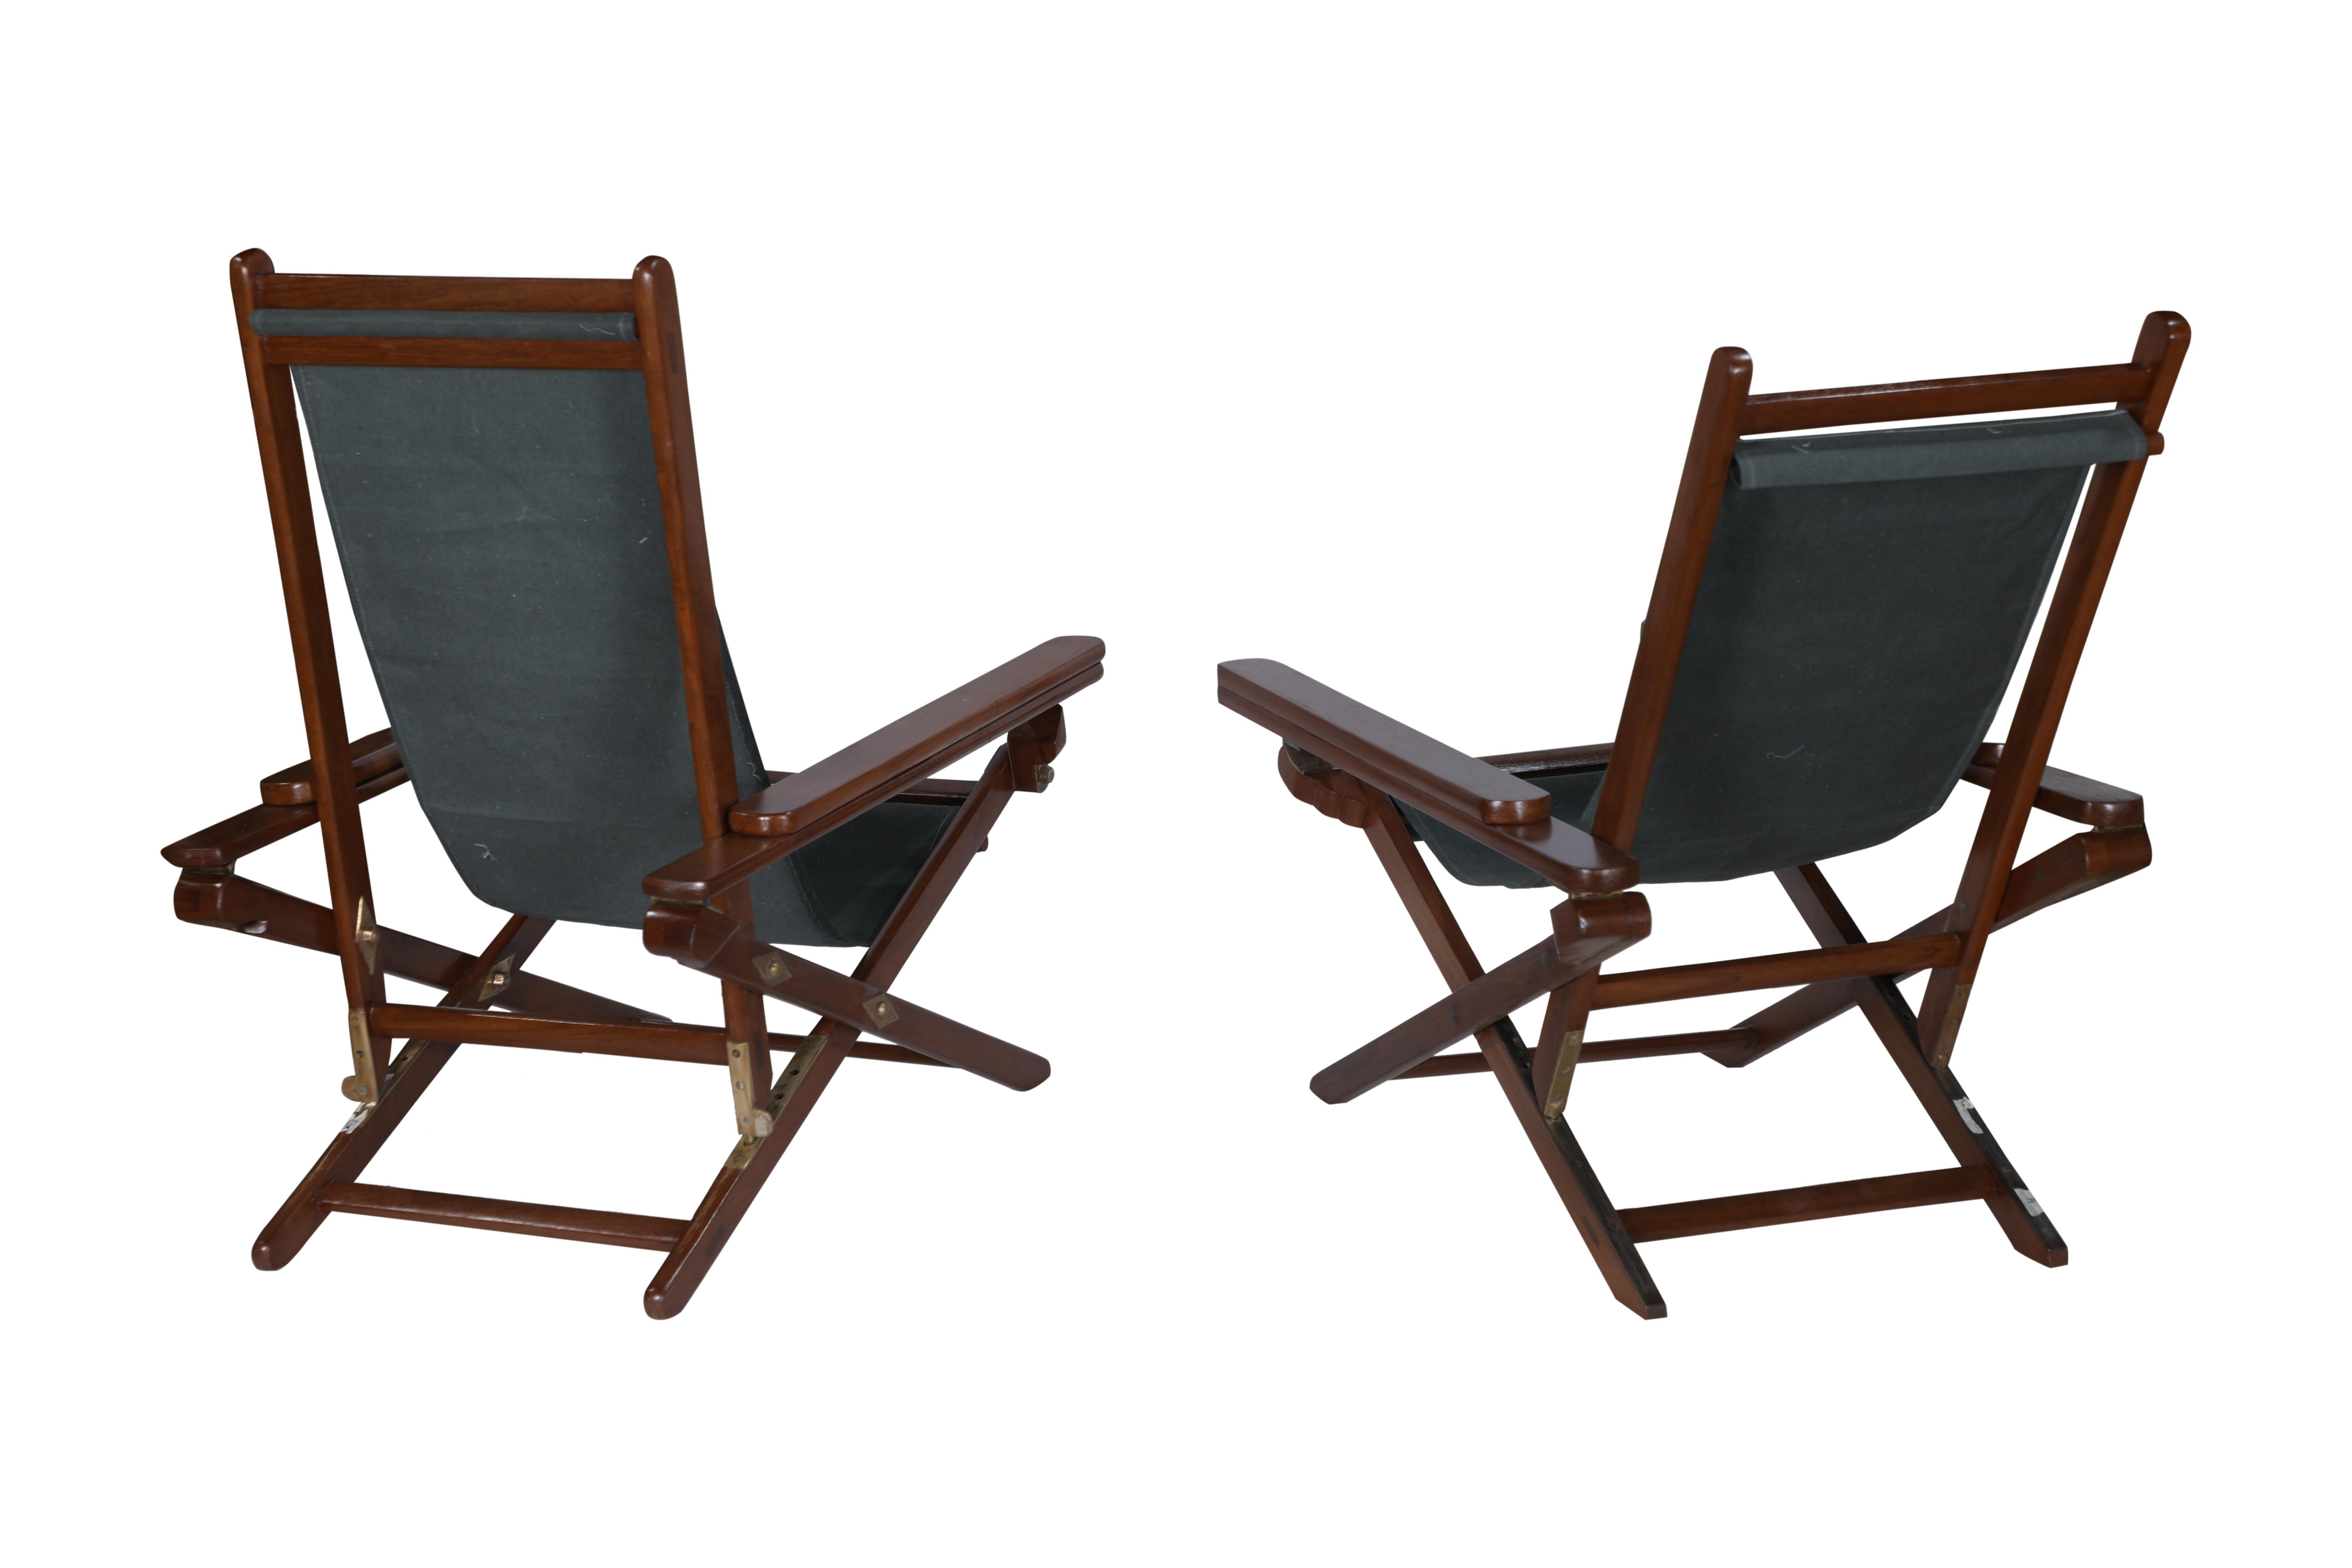 Pair of Canvas Sling-Back Campaign Folding, Adjustable Teak Chairs w/ Leg Rests 2